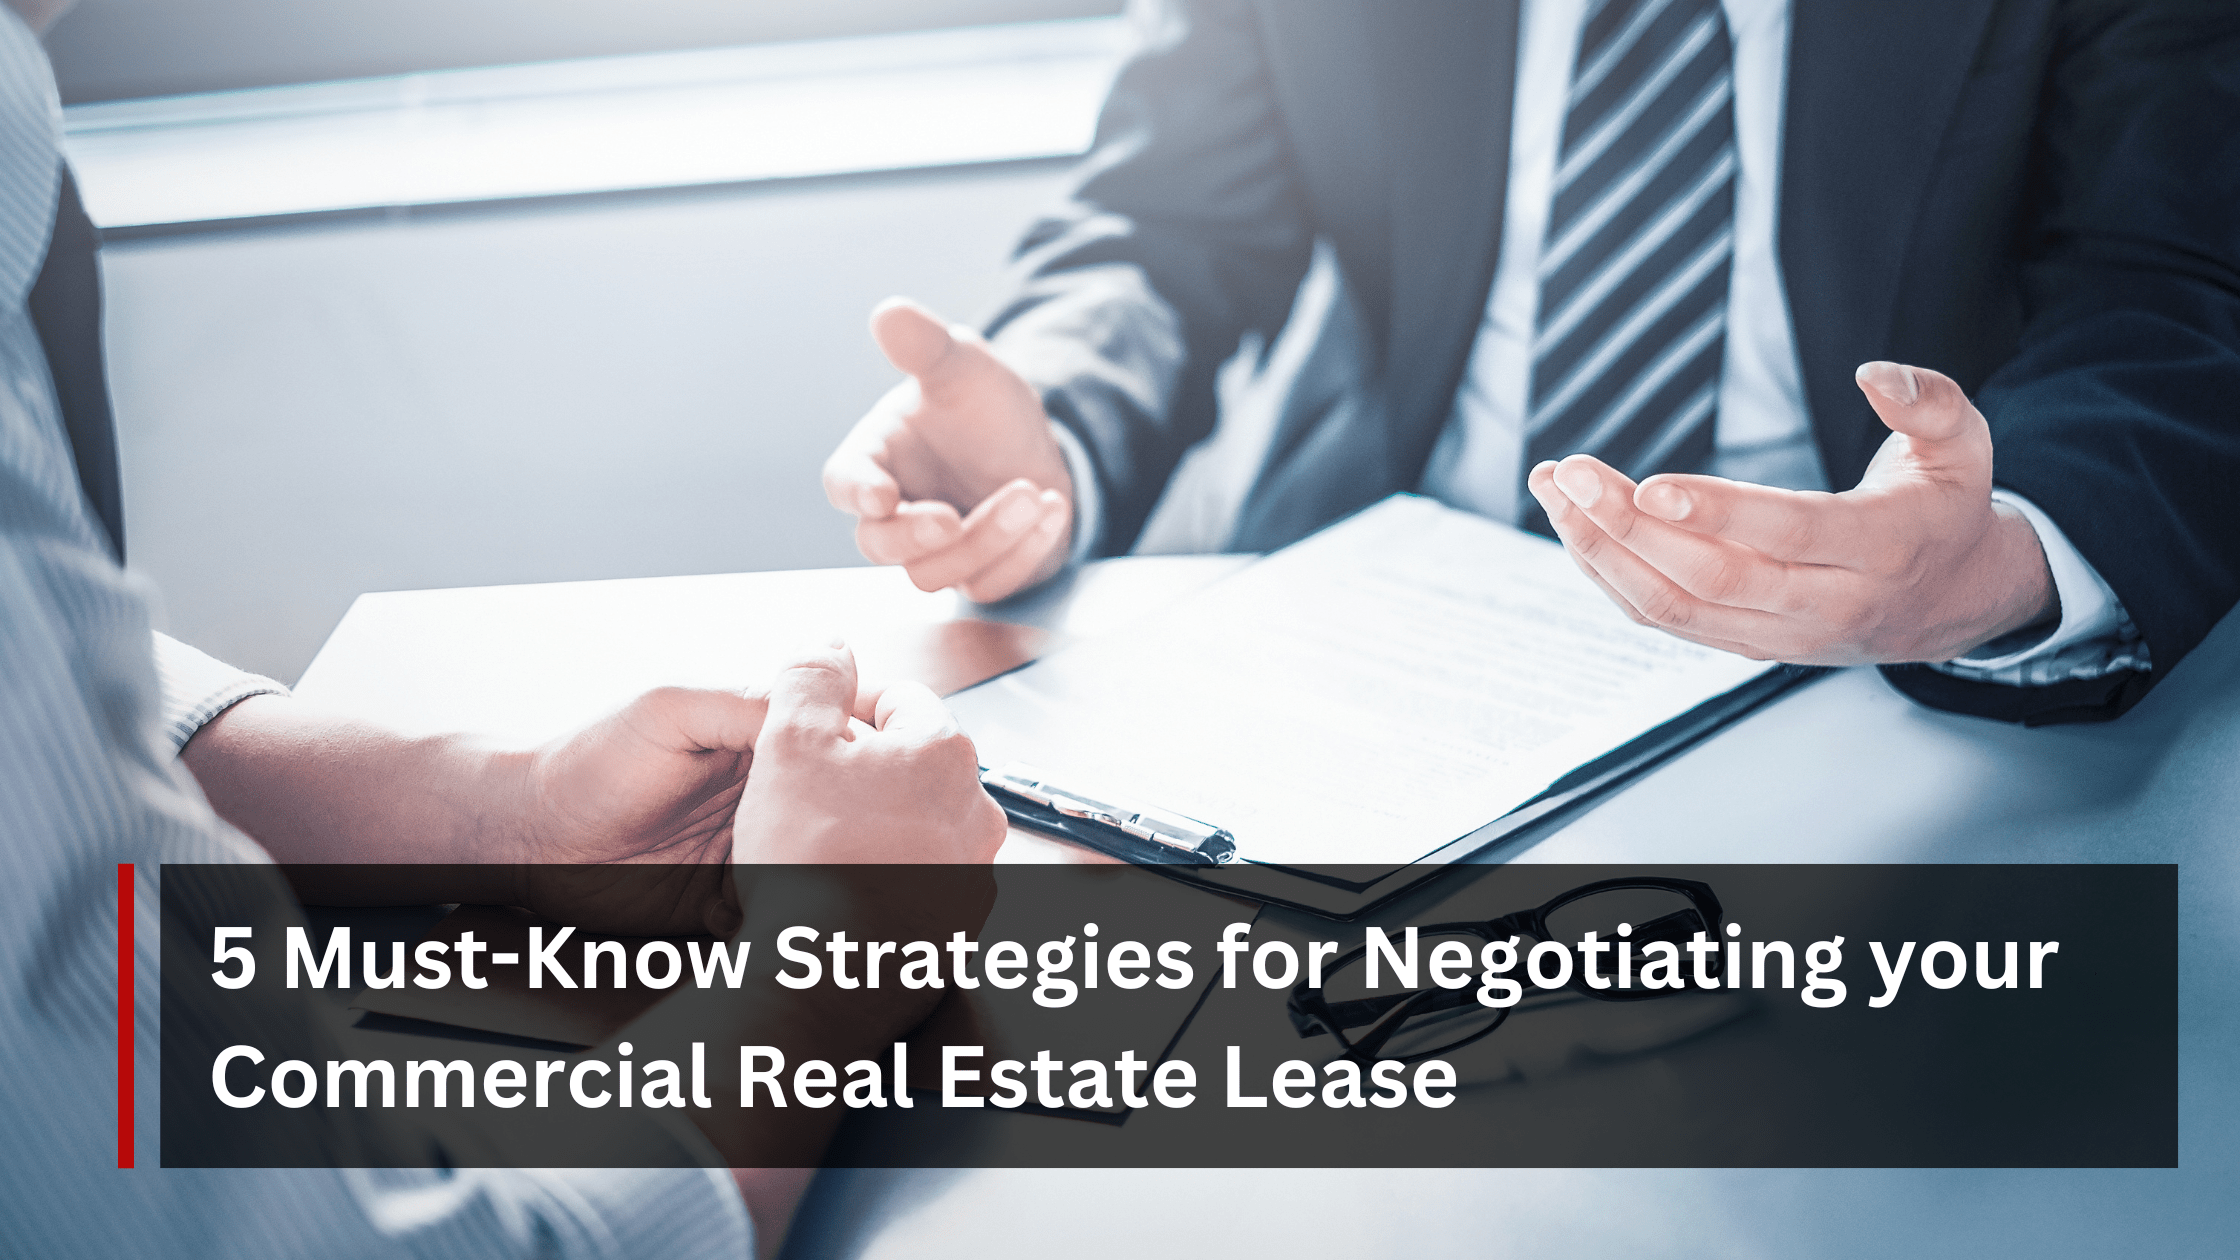 5 Must-Know Strategies for Negotiating your Commercial Real Estate Lease